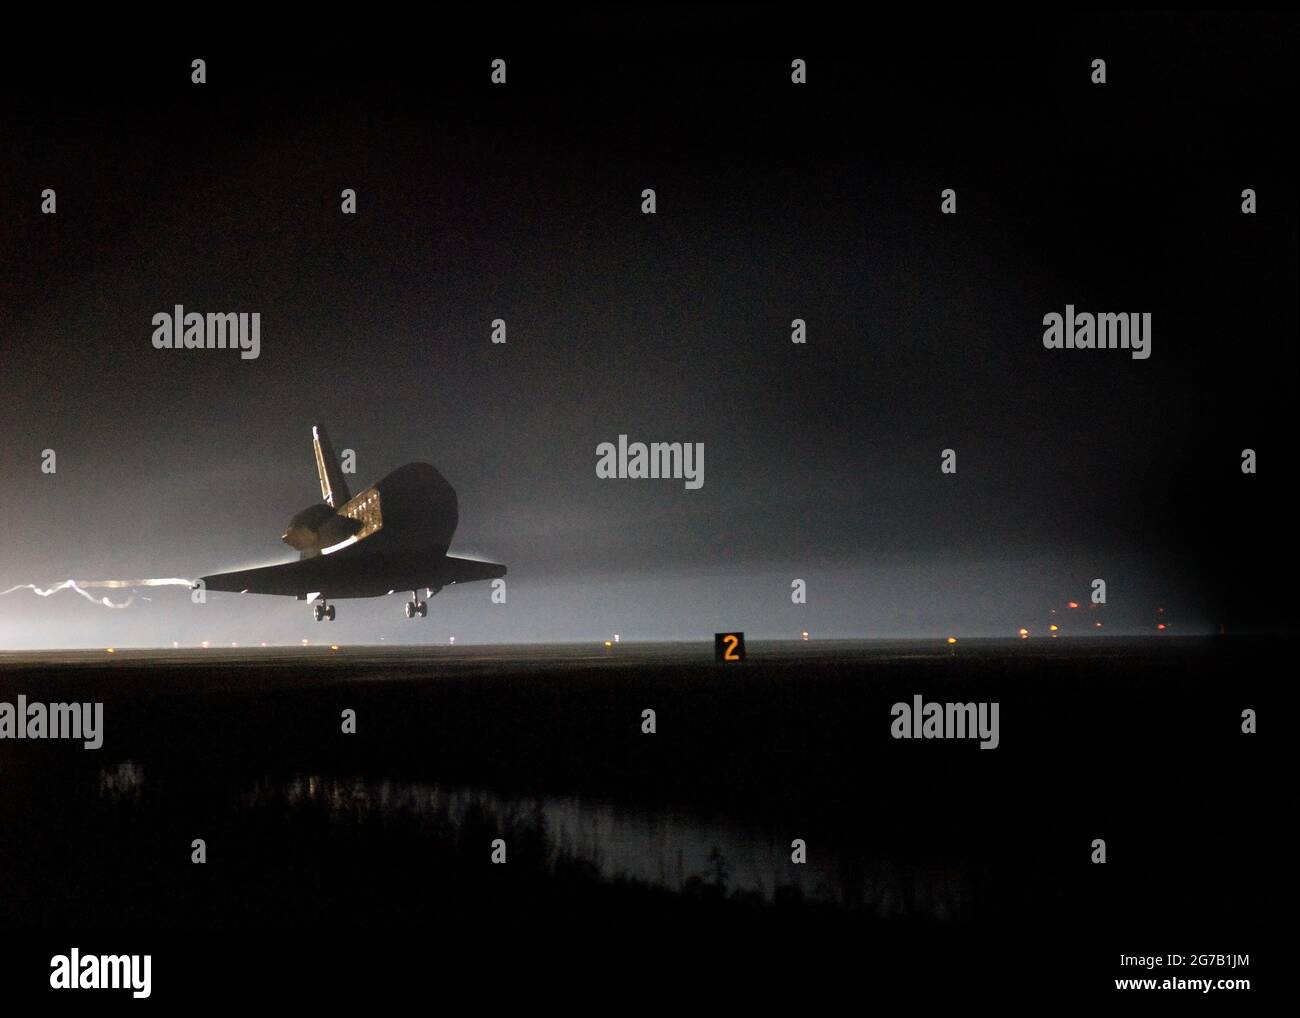 Space Shuttle Endeavour Touchdown STS-123. As night falls on NASA's Kennedy Space Center, Space Shuttle Endeavour is moments away from touchdown on Runway 15 at the Shuttle Landing Facility to end the STS-123 mission, a 16-day flight to the International Space Station.  The mission completed nearly 6.6 million miles.The landing was on the second opportunity after the first was waved off due to unstable weather in the Kennedy Space Center area.   A unique optimised and enhanced version of an NASA image / mandatoty credit: NASA Stock Photo